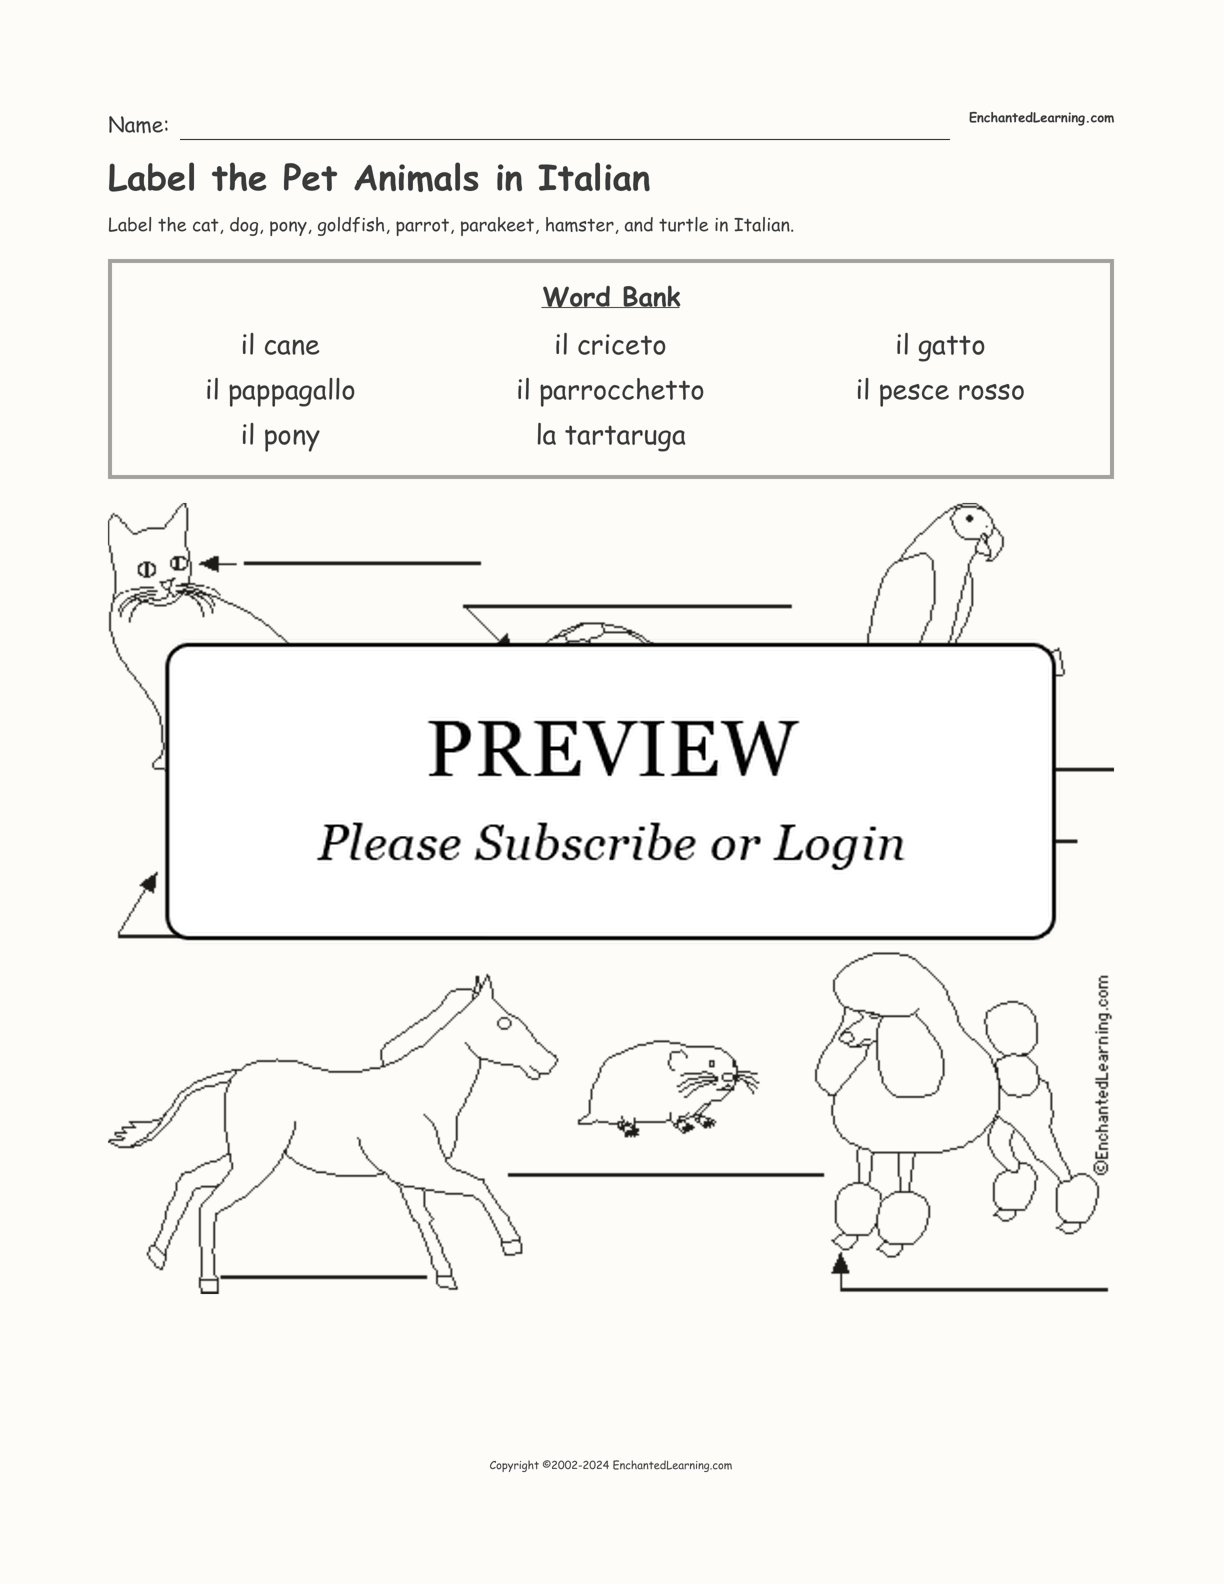 Label the Pet Animals in Italian interactive worksheet page 1